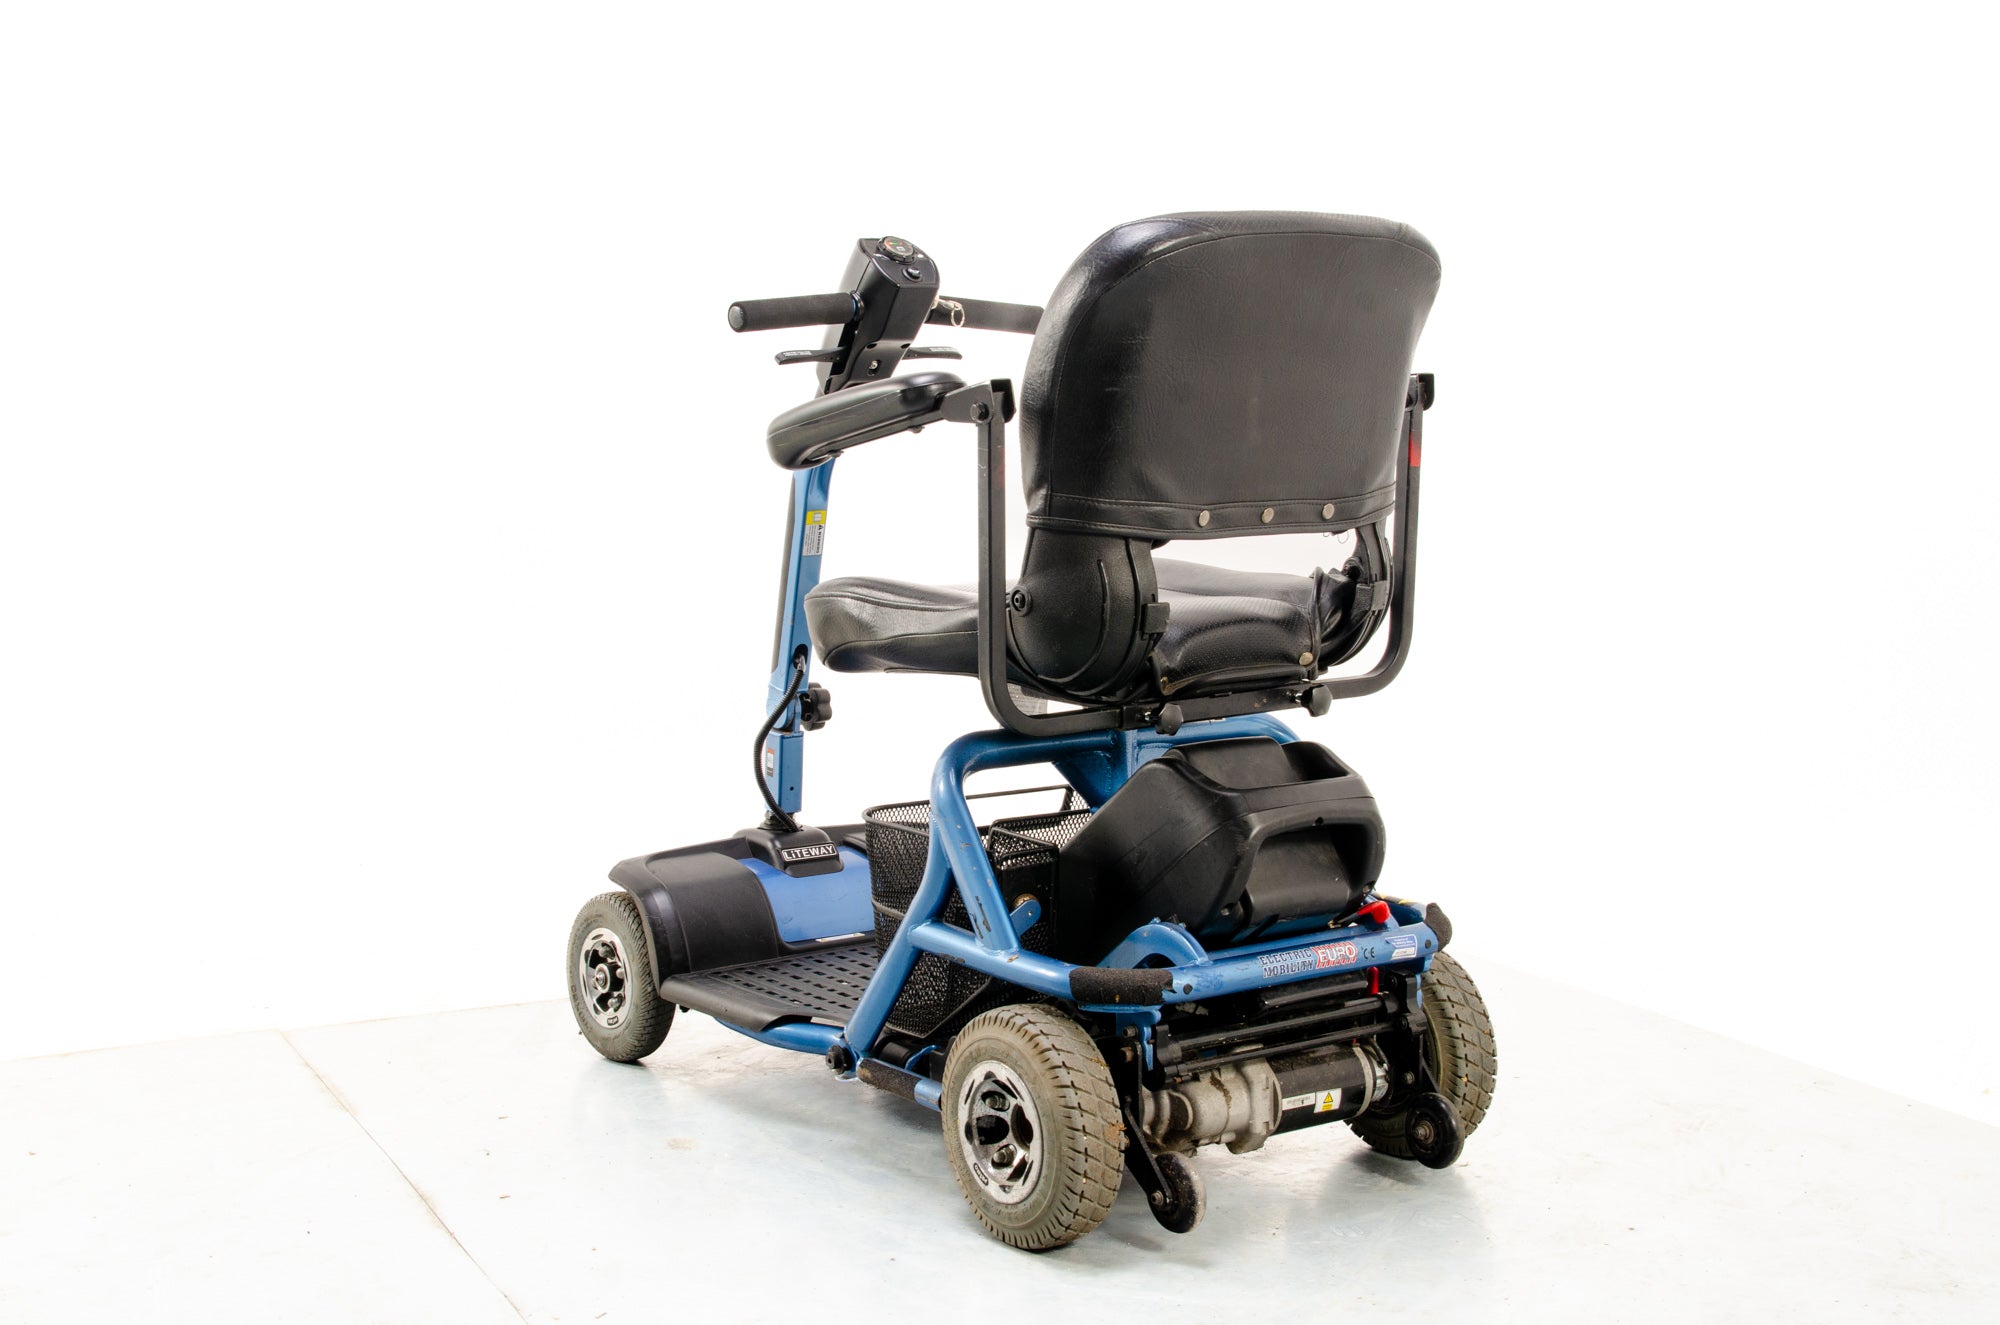 Rascal Liteway 4 Used Mobility Scooter Lightweight Compact Electric Folding Transportable Boot